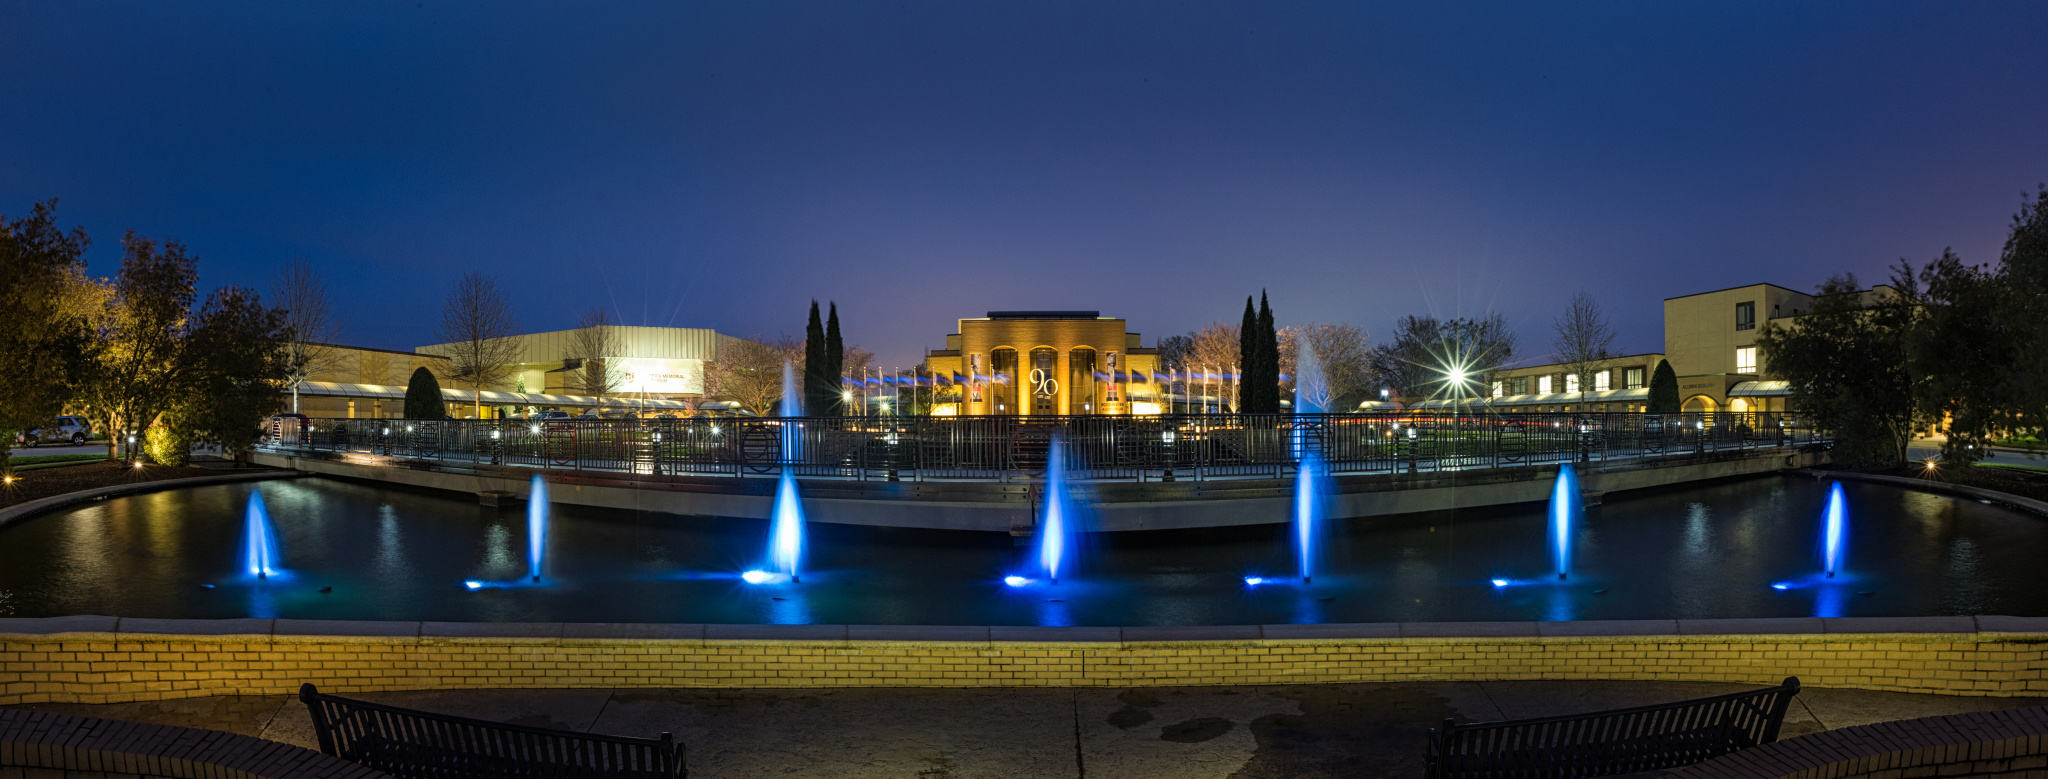 The updated fountains of God's Glory Garden tinted blue to honor law enforcement (Photo by Derek Eckenroth)